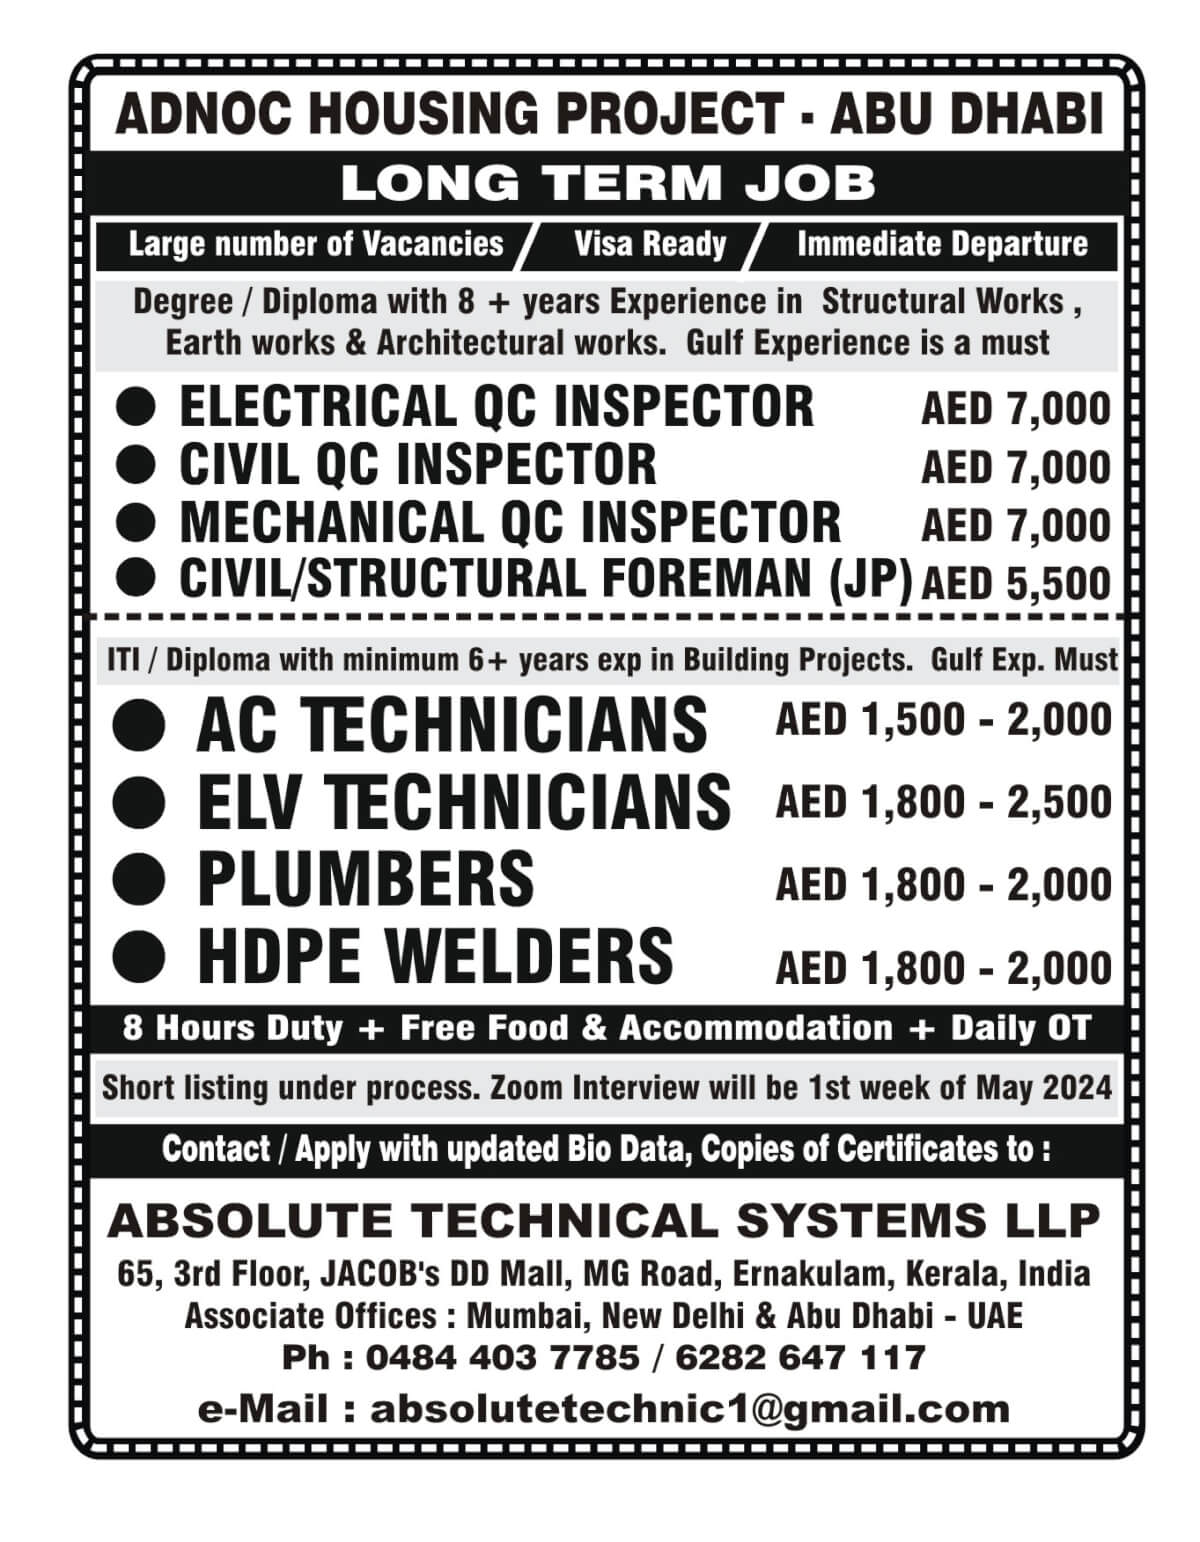 LONG TERM REQUIREMENT FOR ABUDHABI